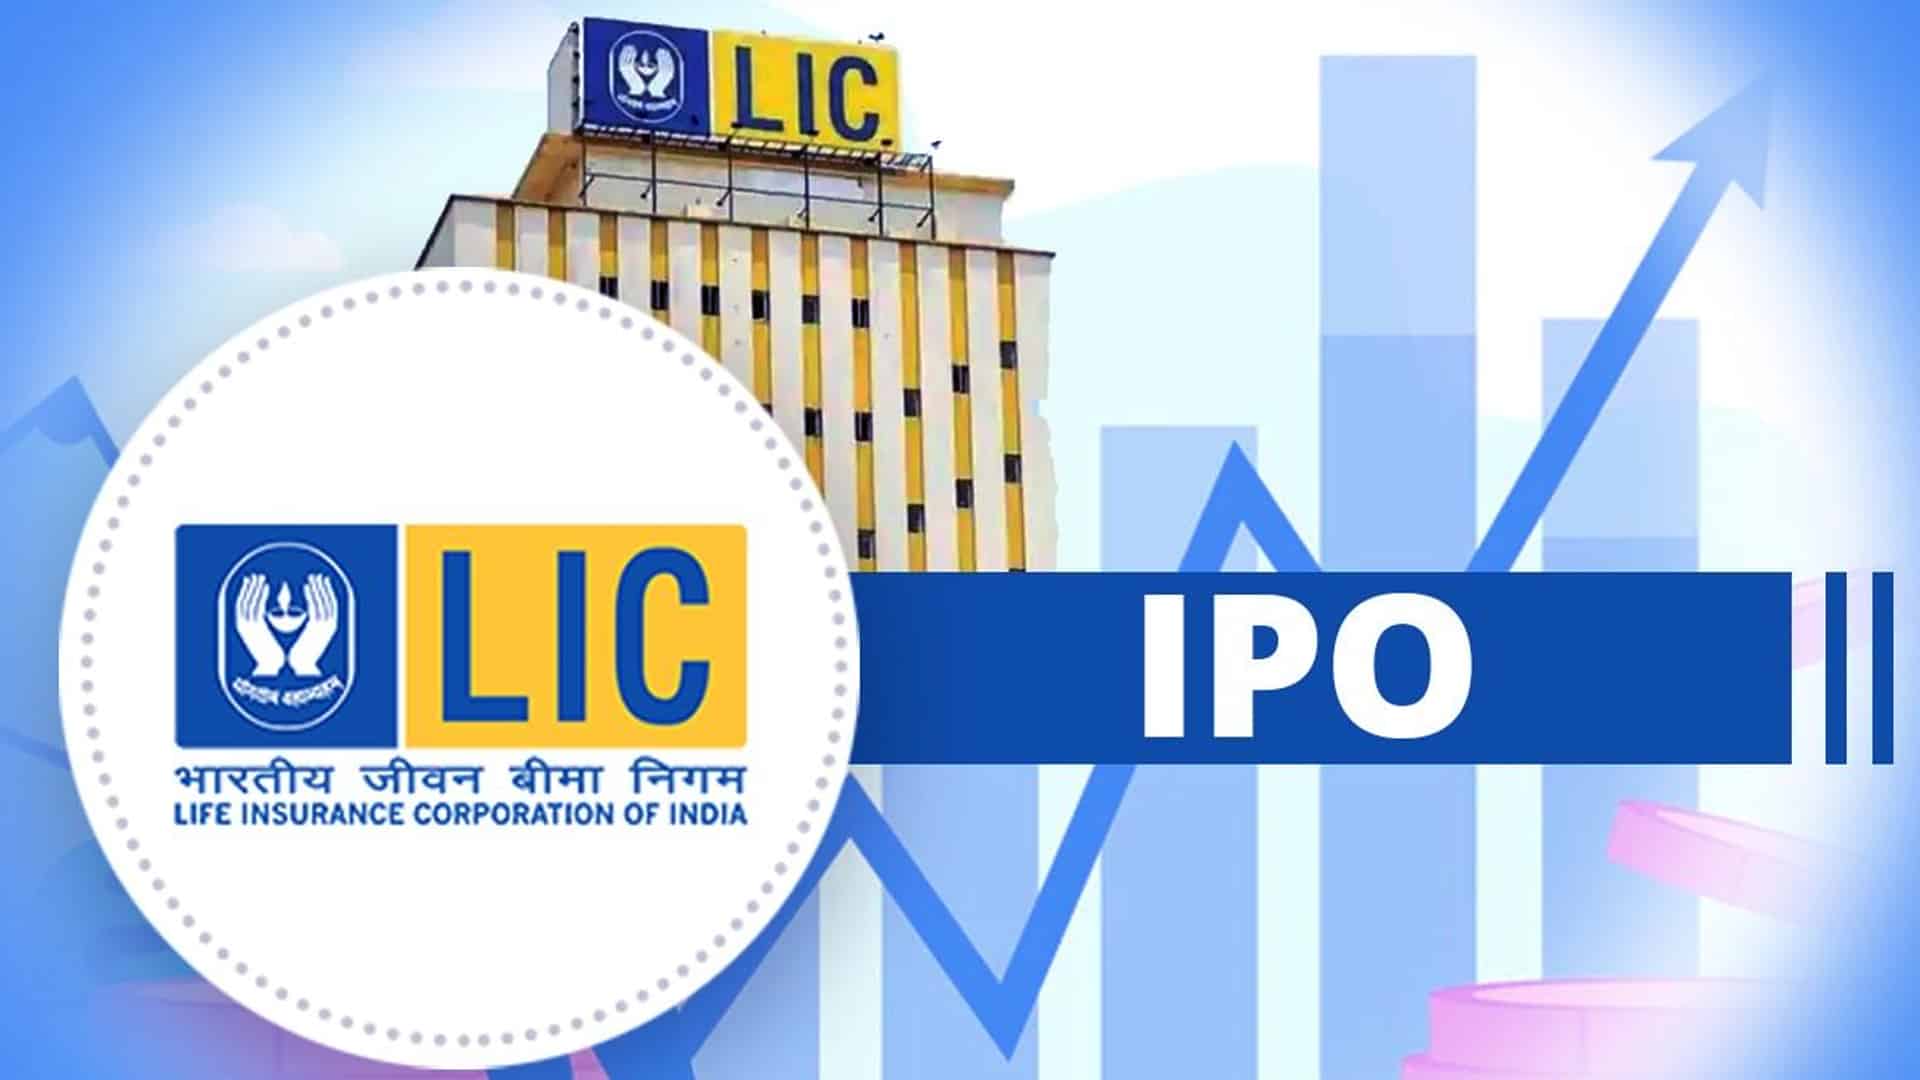 Sebi approves LIC draft papers; clears decks for mega IPO